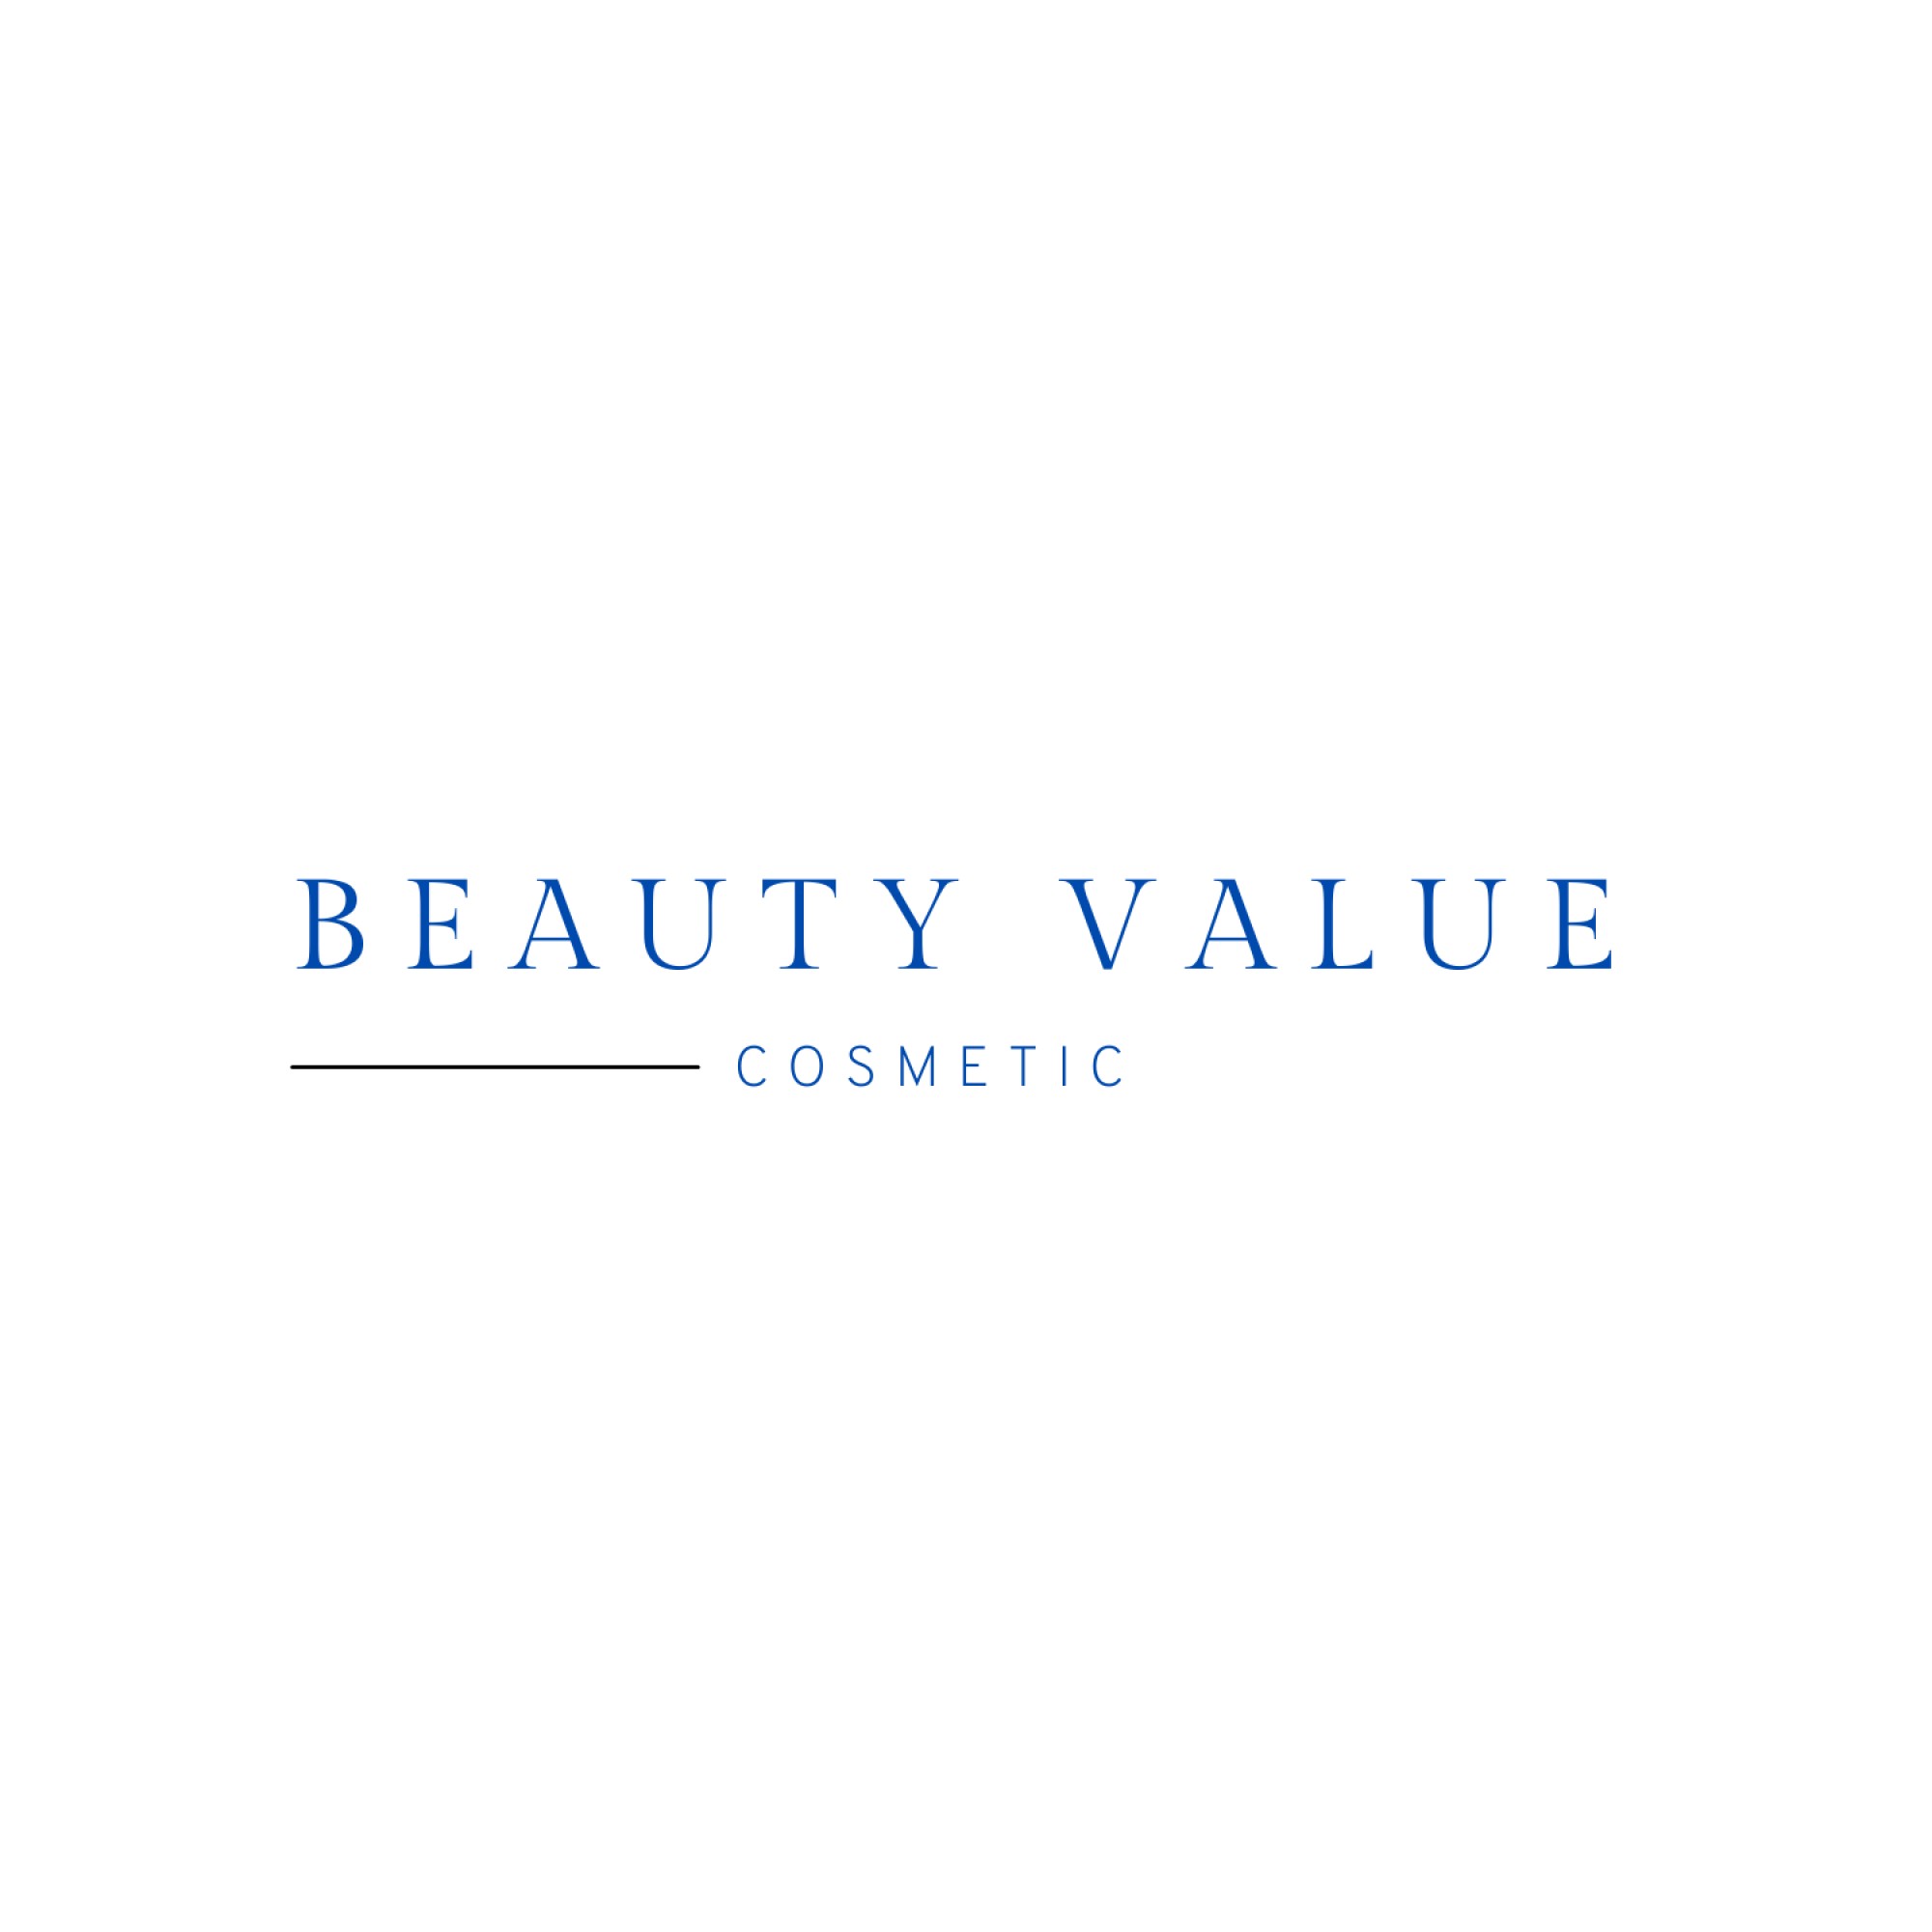 Logo campagna equity crowdfunding Beauty Value